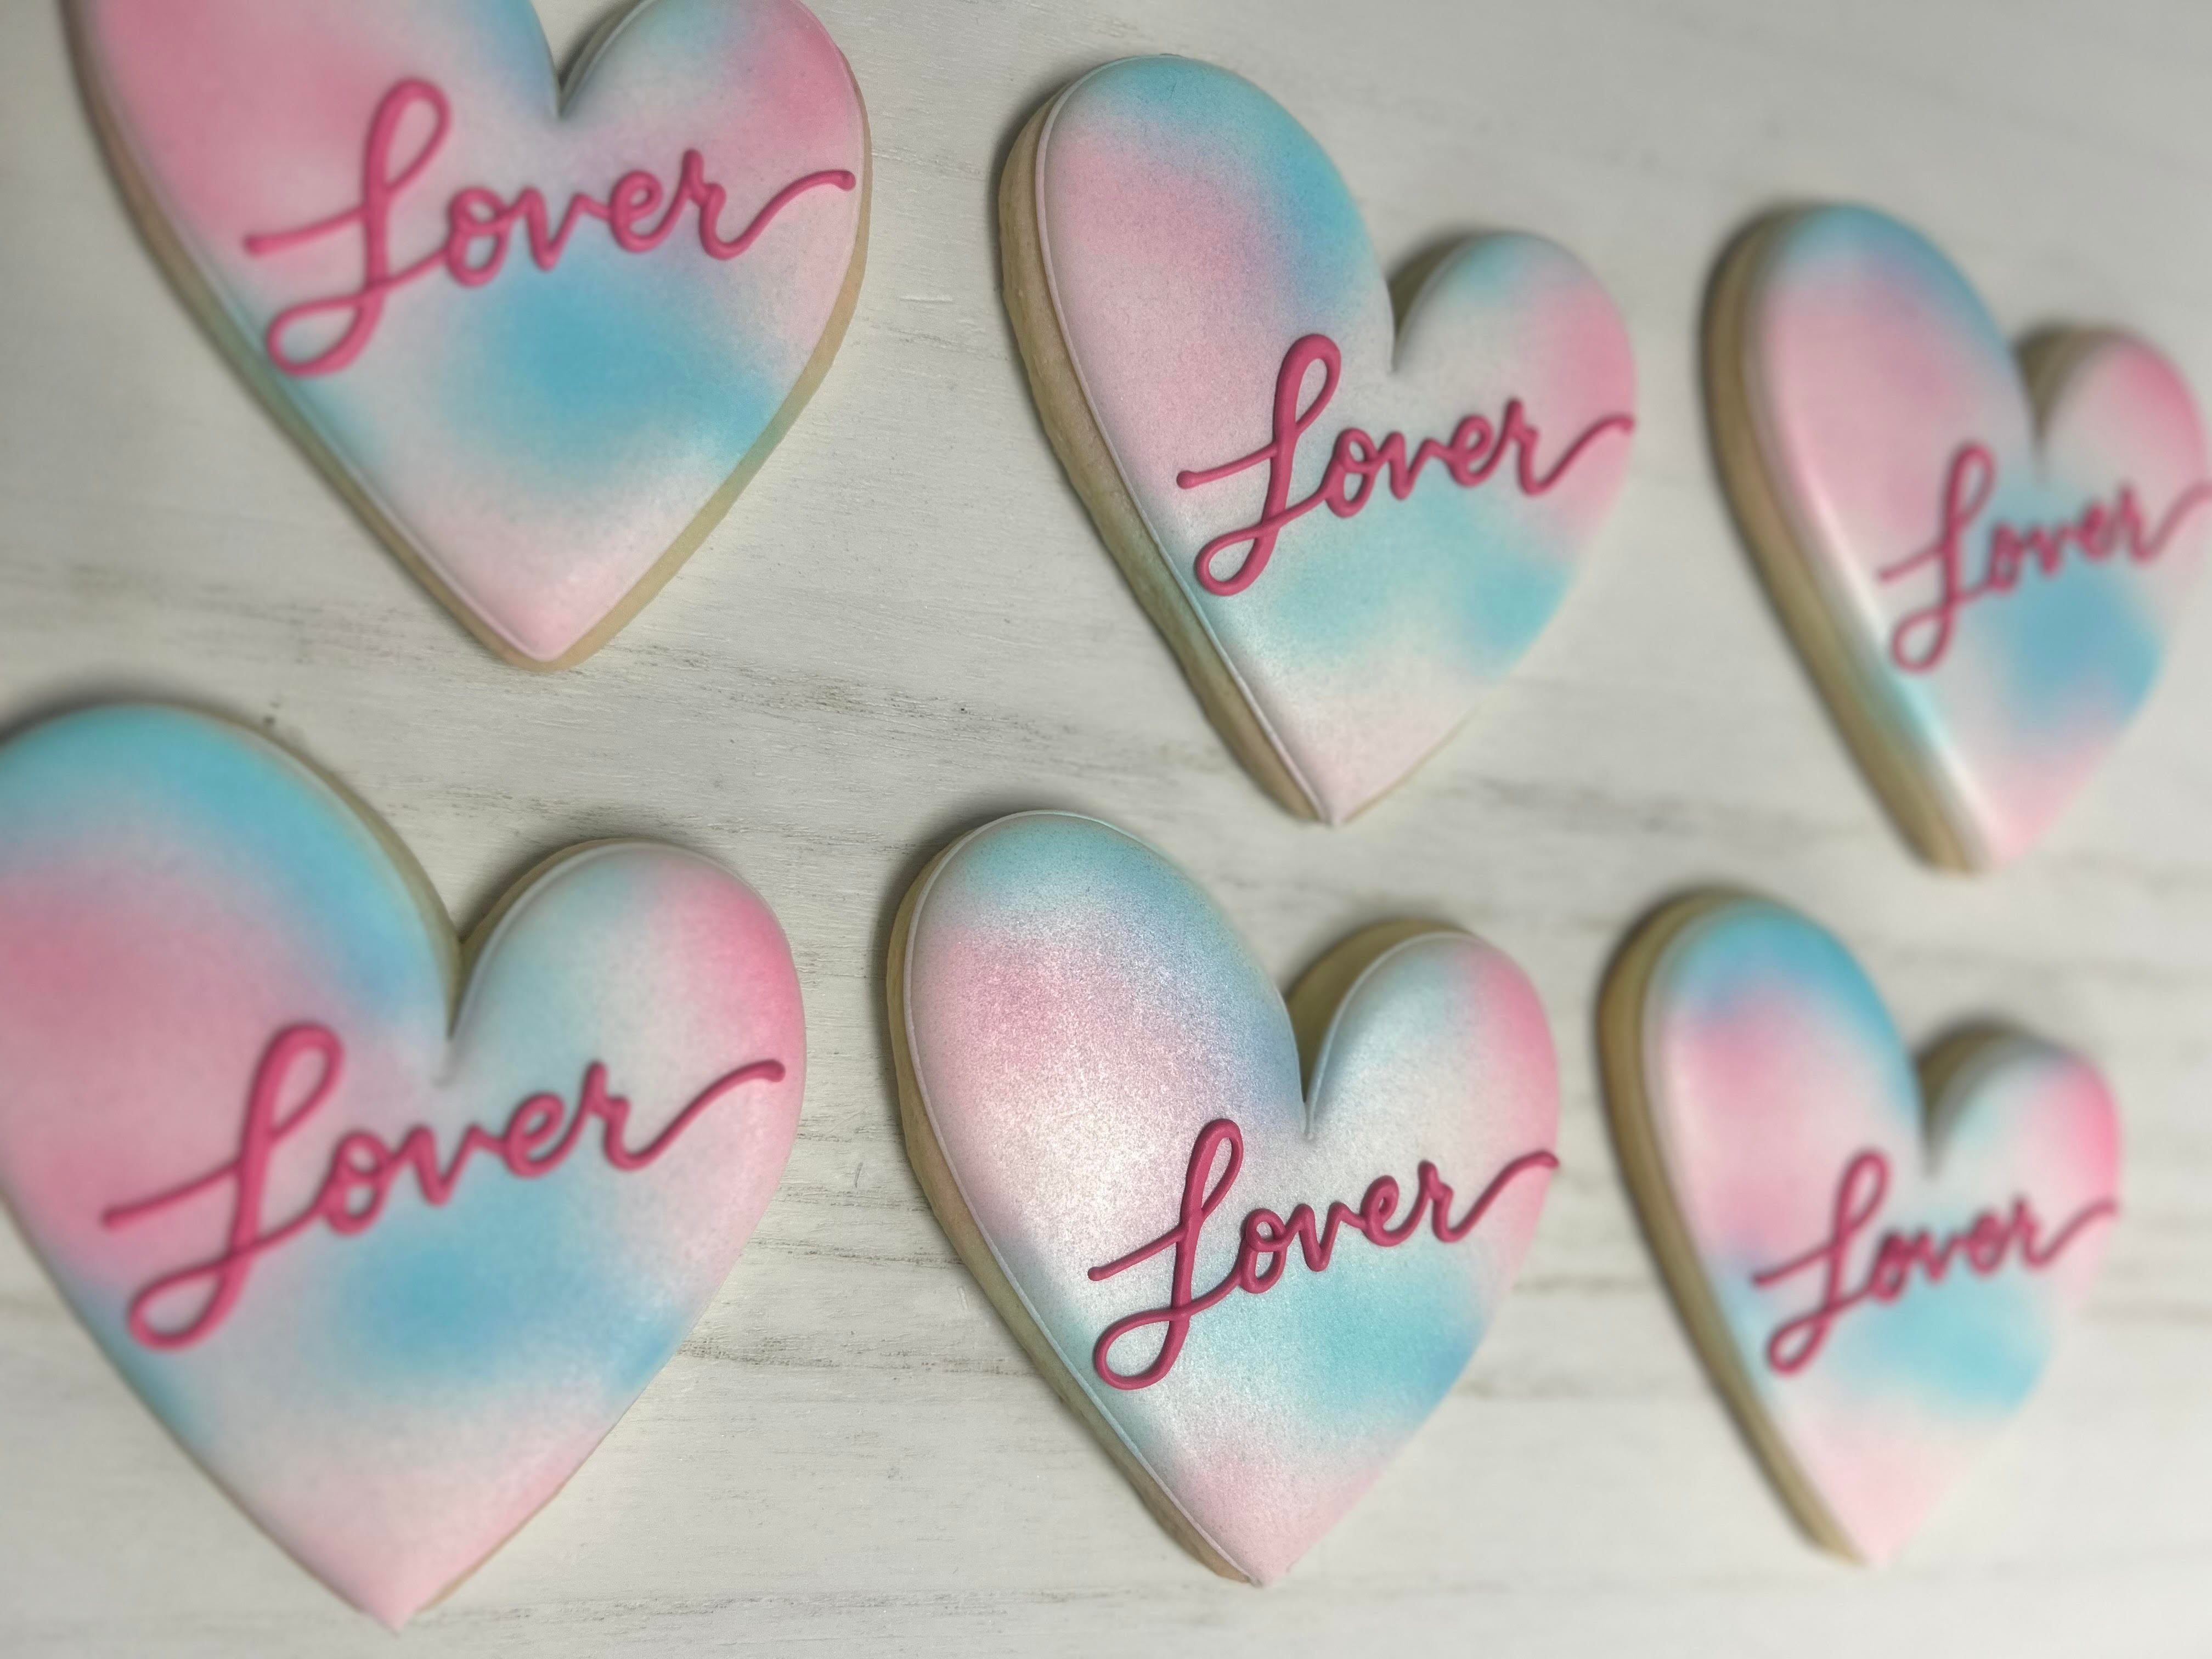 Taylor Swift Inspired Lover Heart Cookies